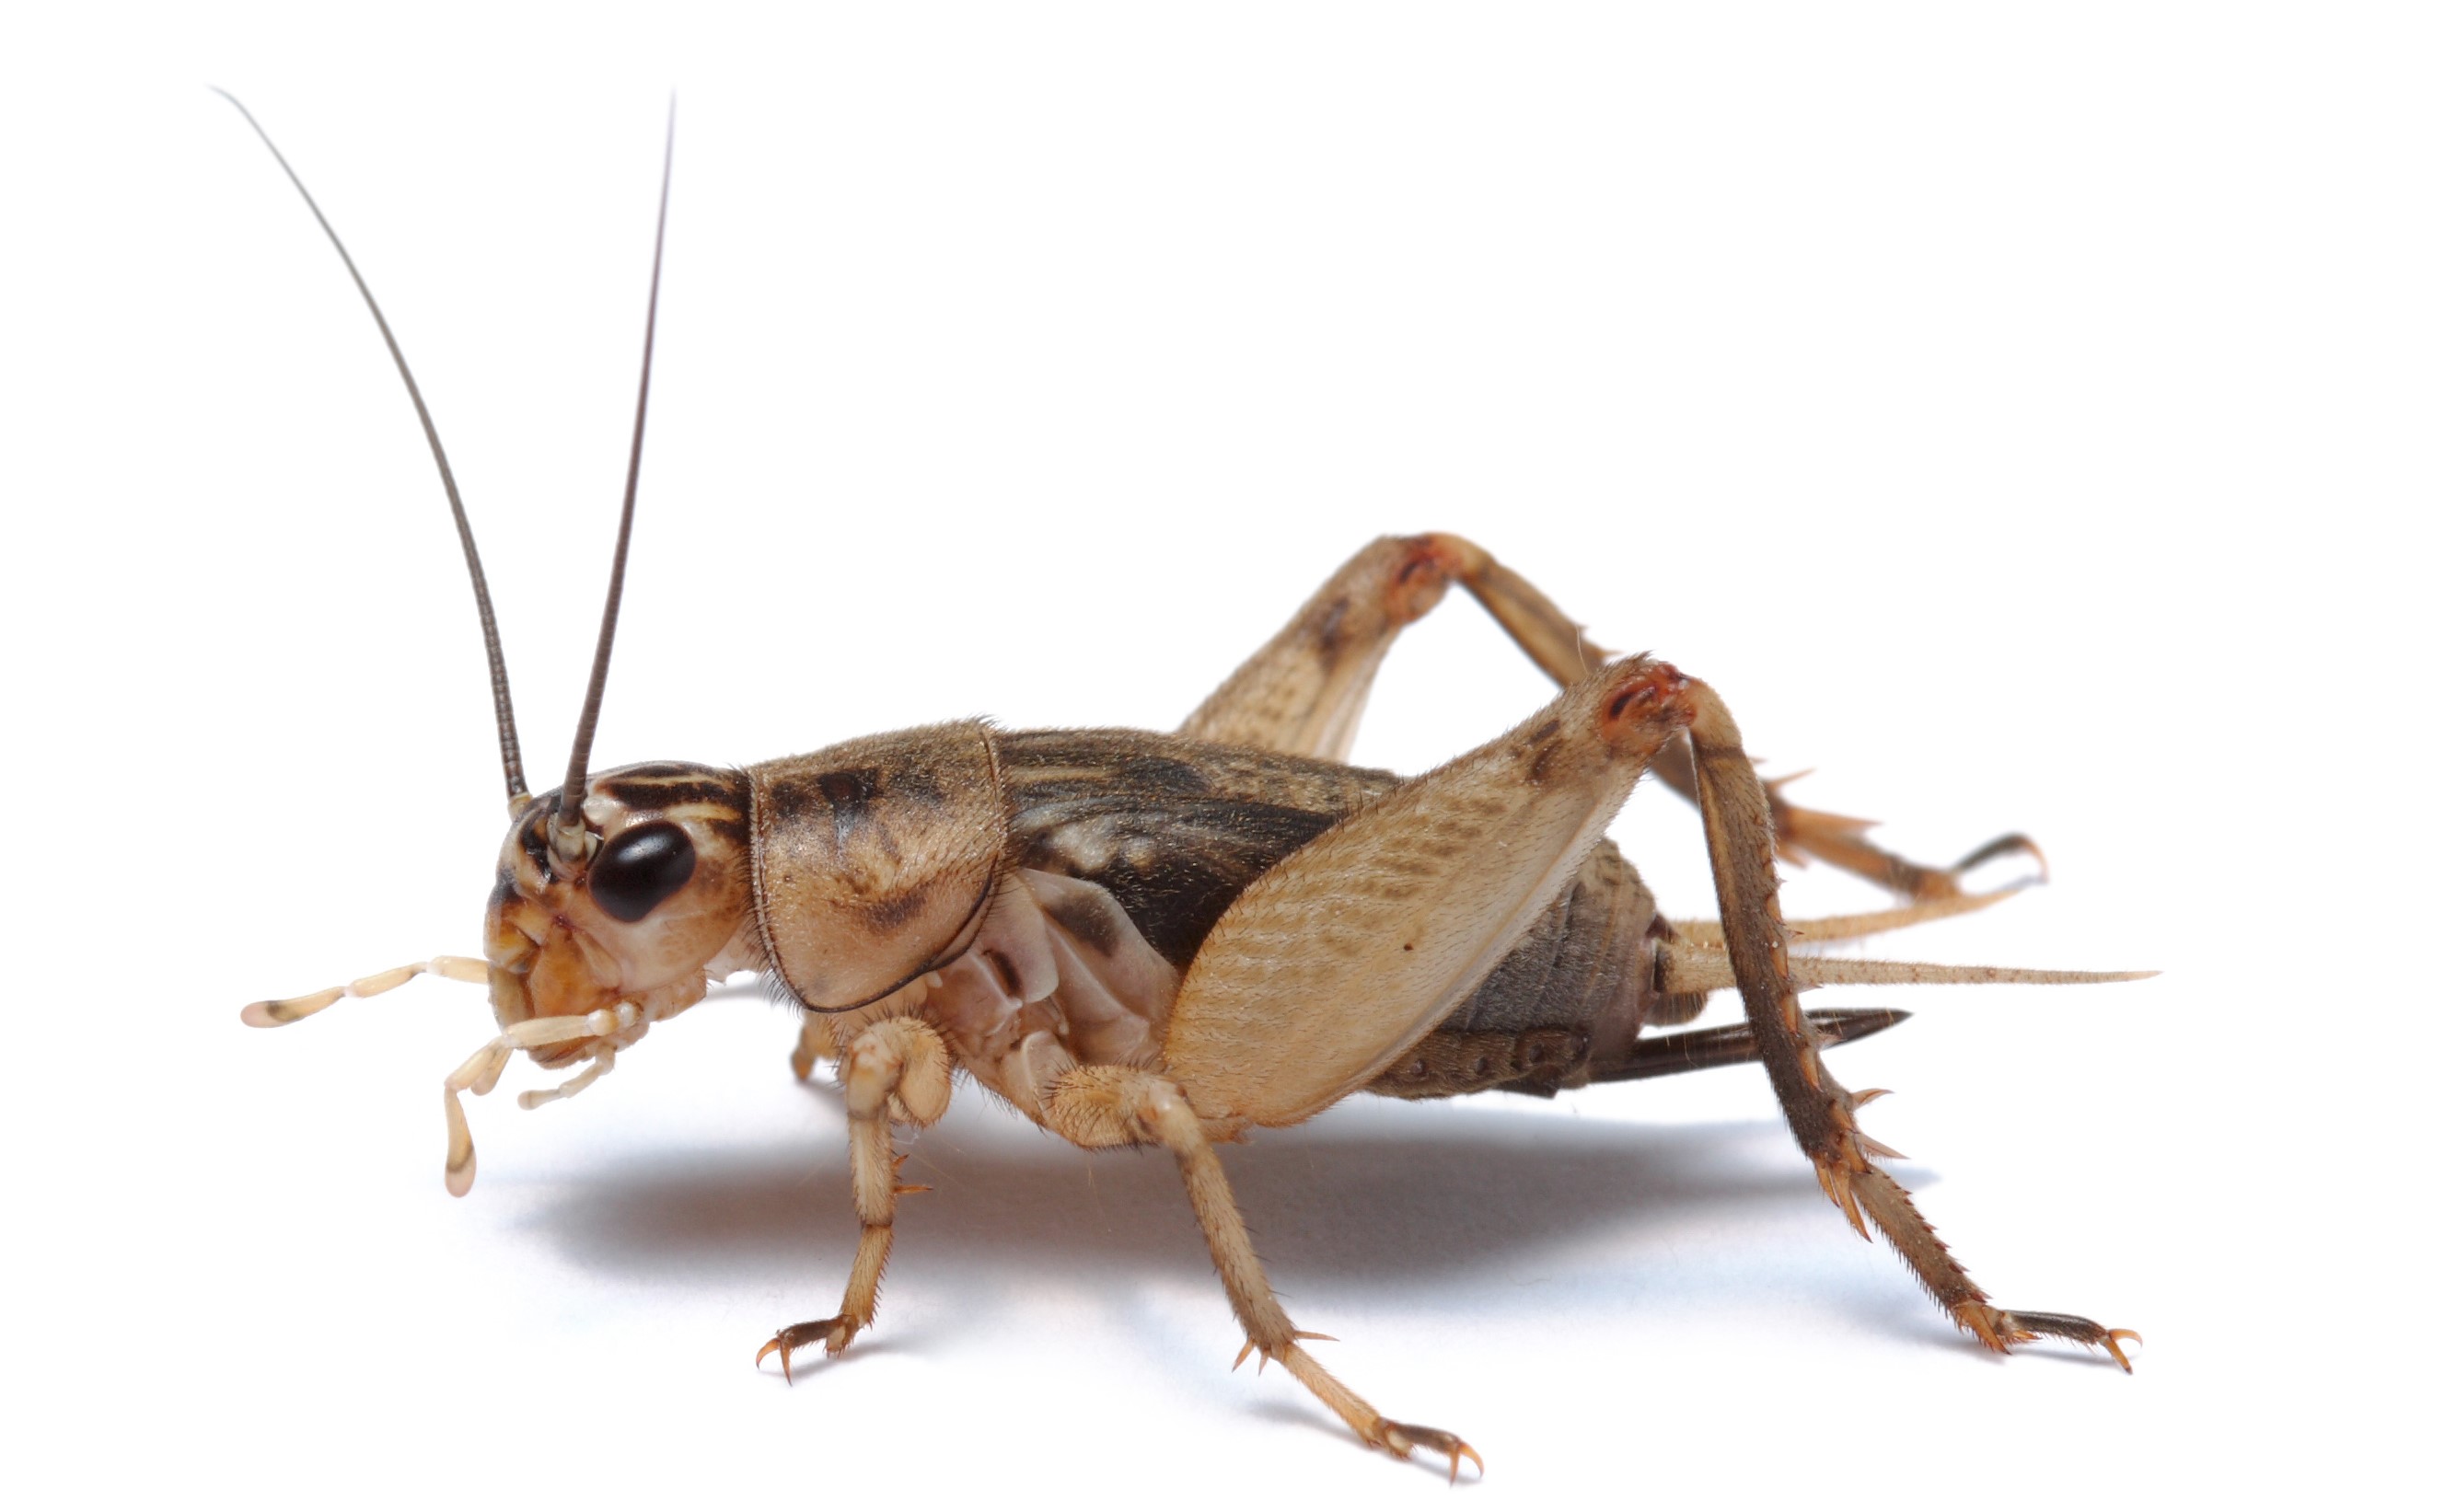 Cricket - Insectus feed for insect farming